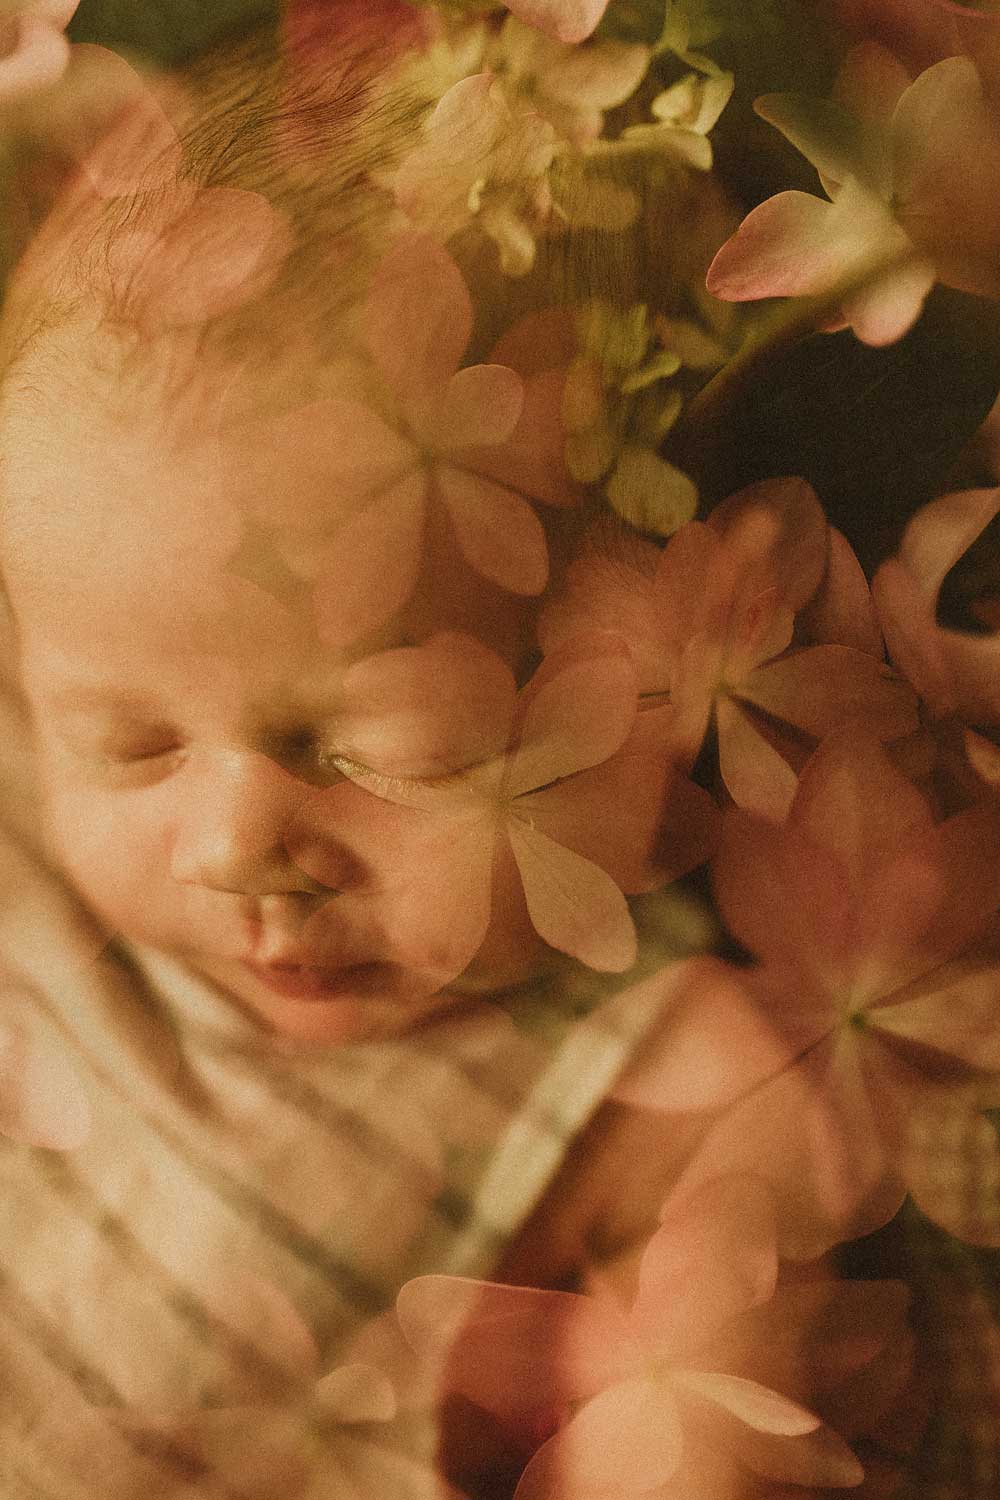 Artistic and creative newborn photography Sydney. A unique approach to photographing a newborn using double exposure, with flowers and babies face.